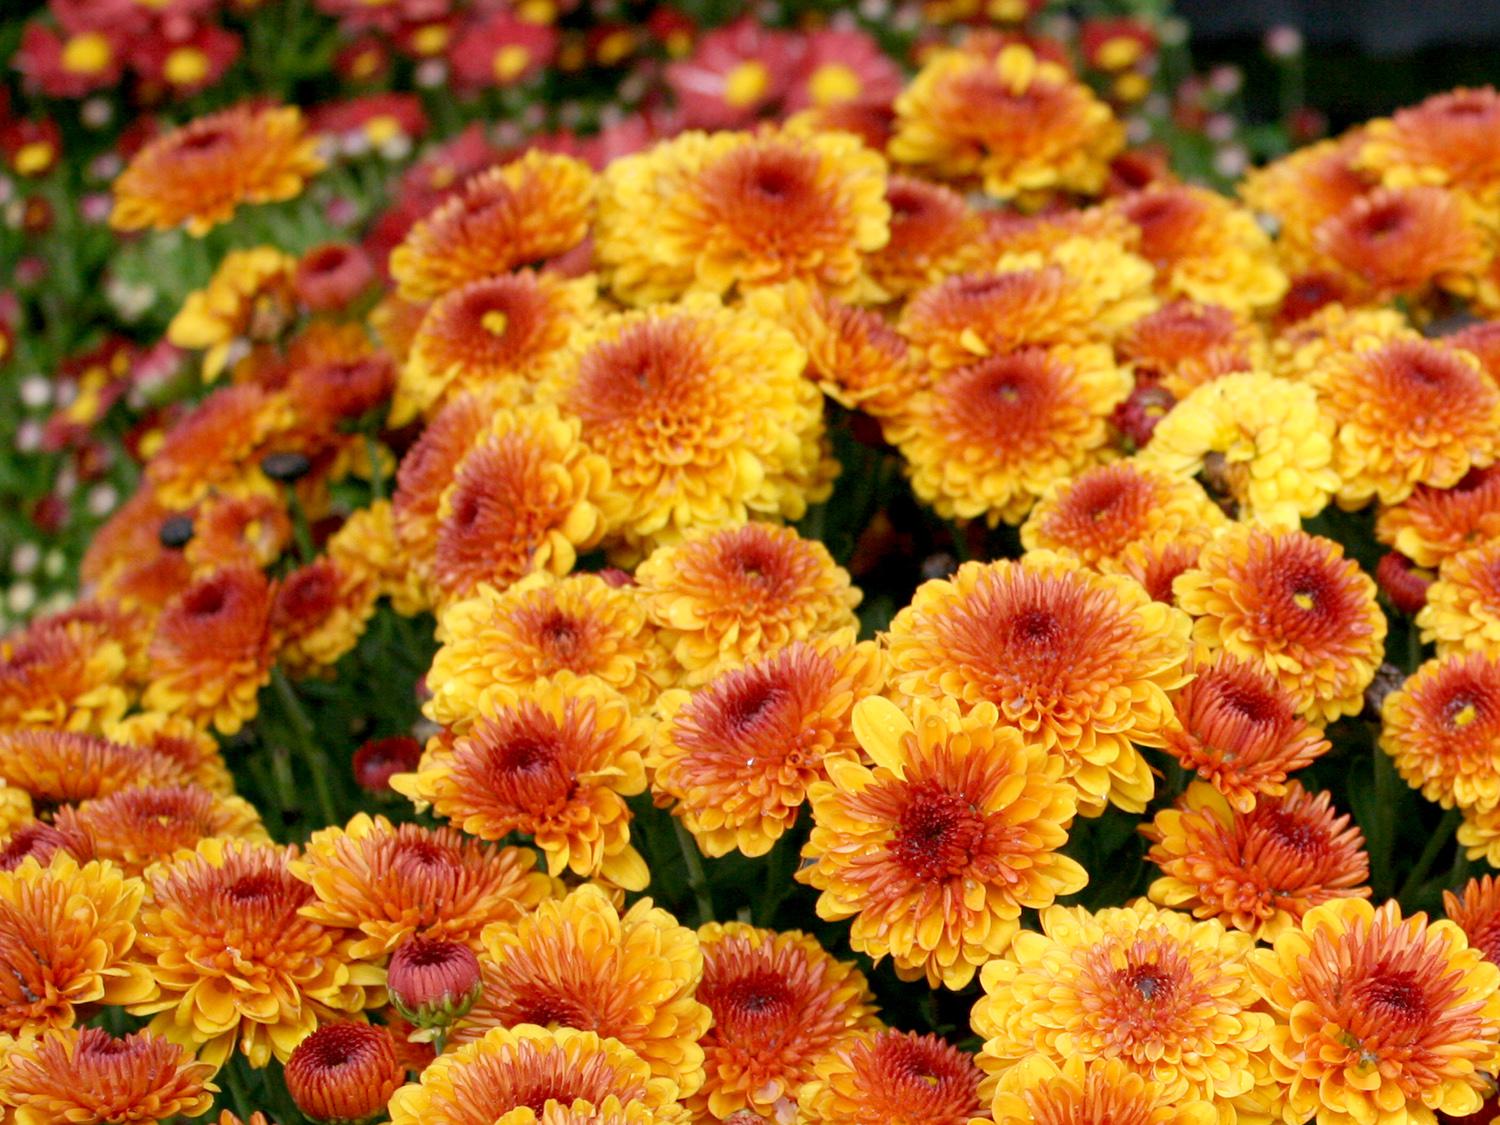 Fall mums are a useful bridge crop between summer and fall. They can be treated as seasonal annuals to provide an easy and reliable display of color for the in-between period. (Photo by MSU Extension/Gary Bachman)